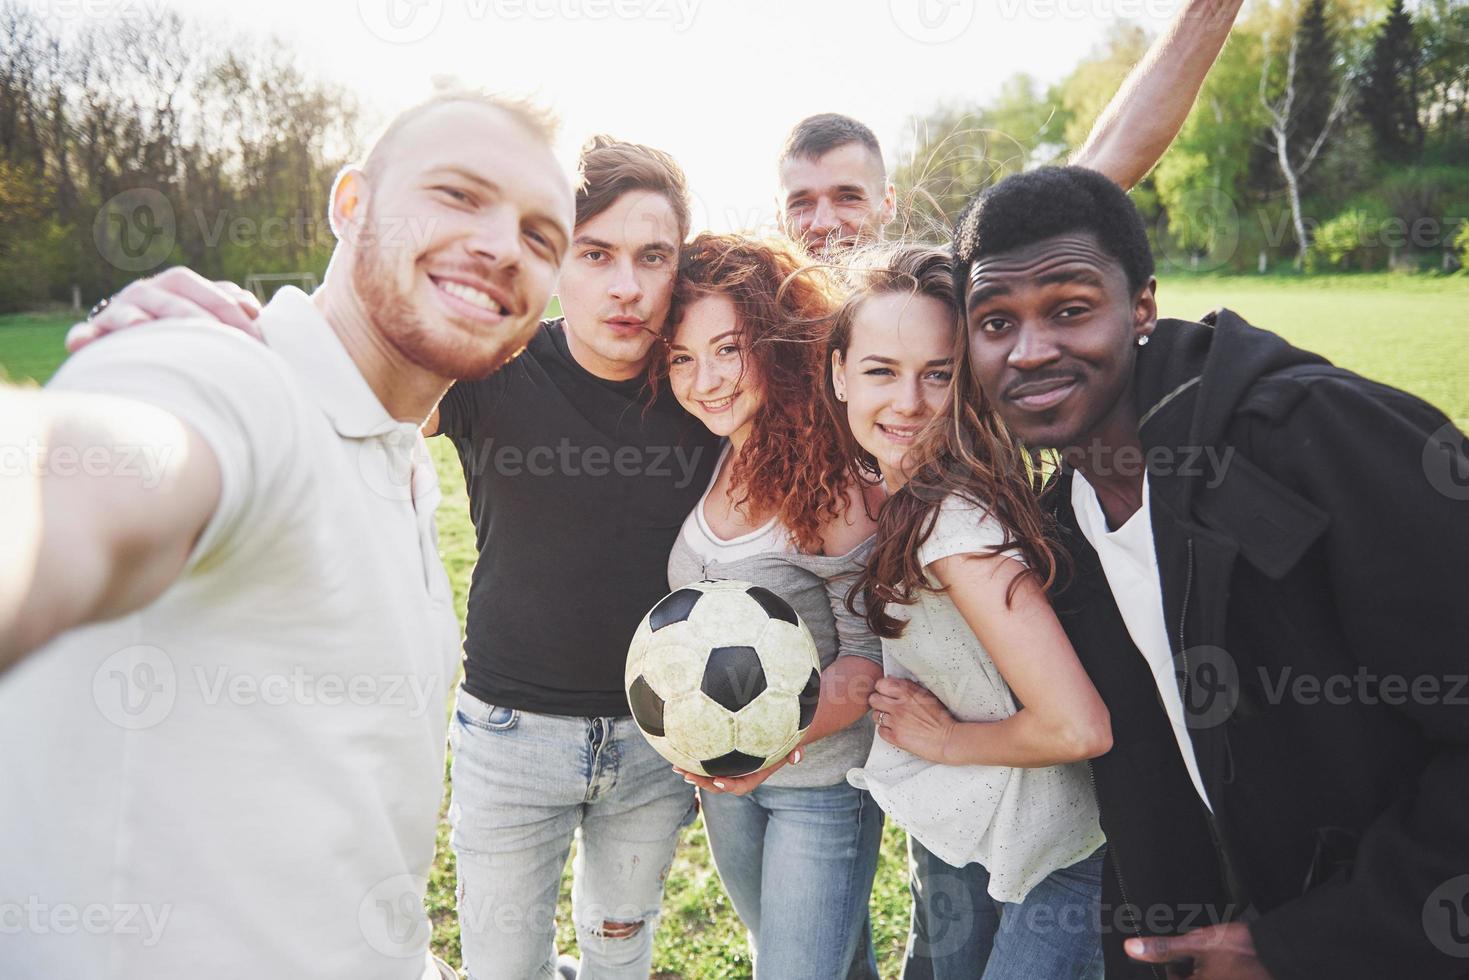 A group of friends in casual outfit do sephi on the soccer field. People have fun and have fun. Active rest and scenic sunset photo